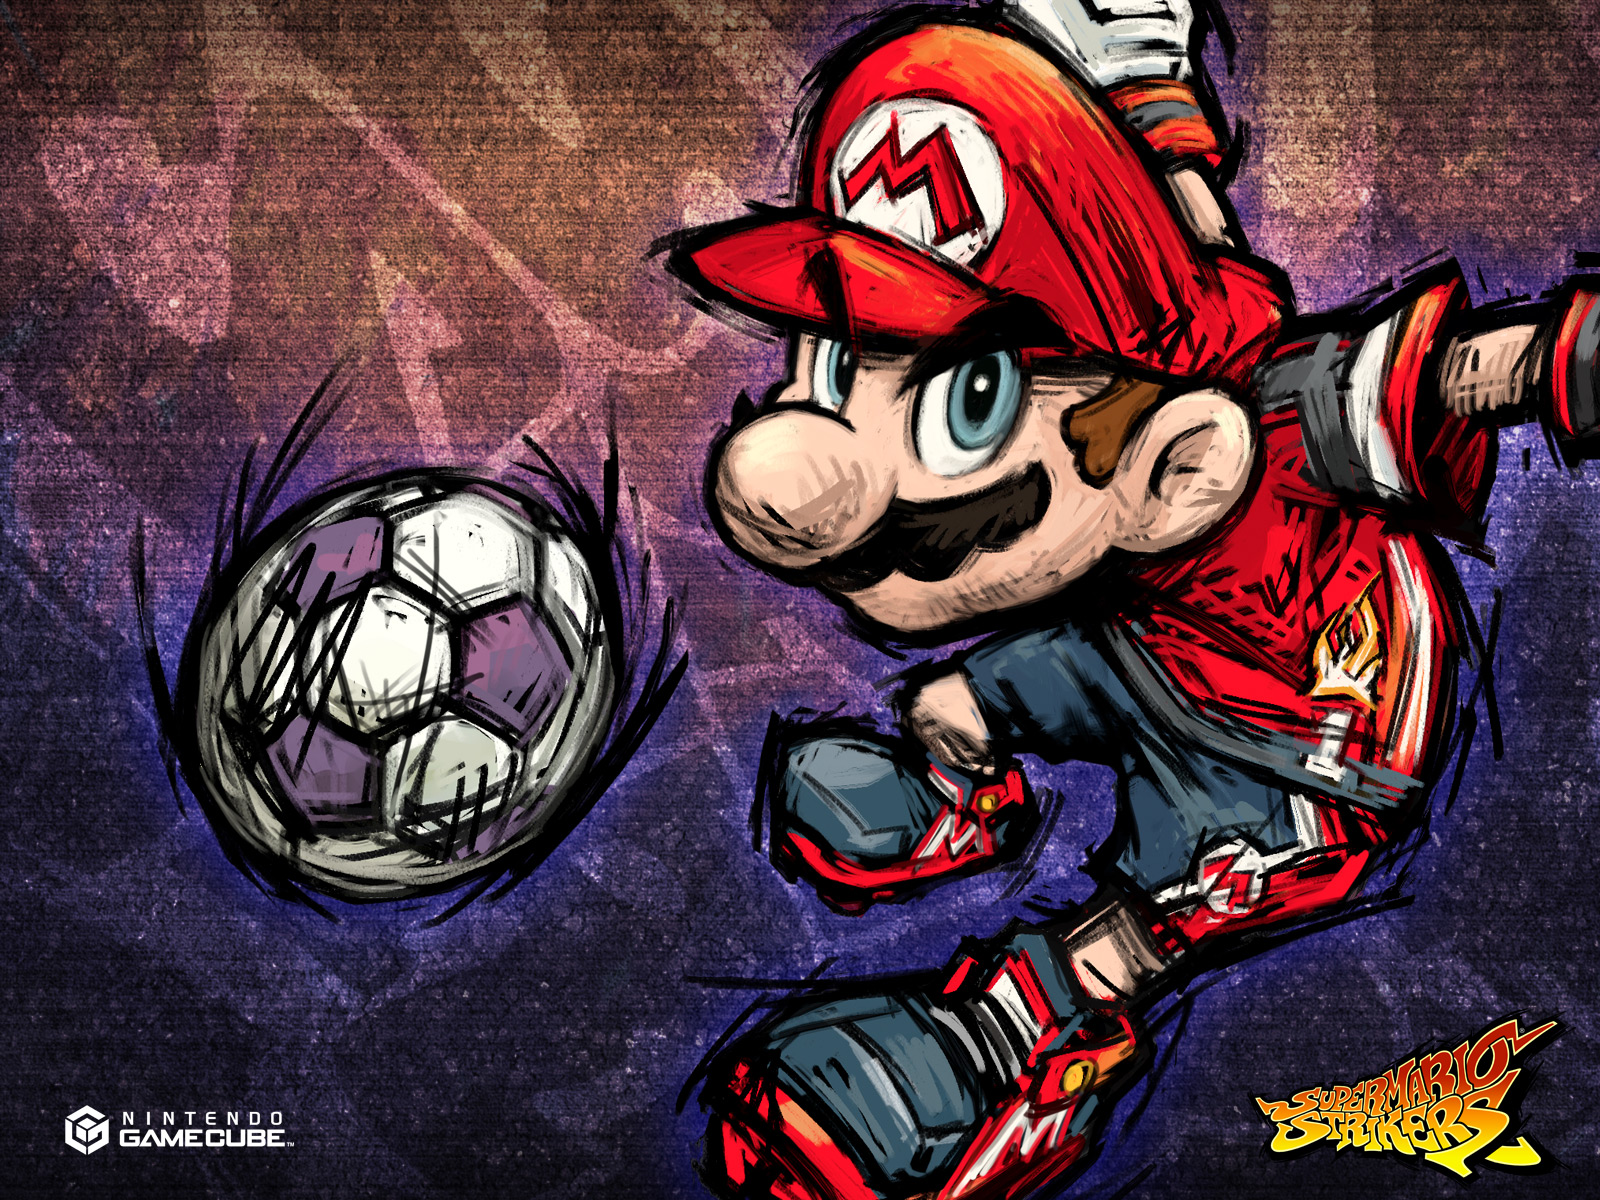 Super Mario Strikers Wallpaper And Background Image - Super Mario Strikers , HD Wallpaper & Backgrounds